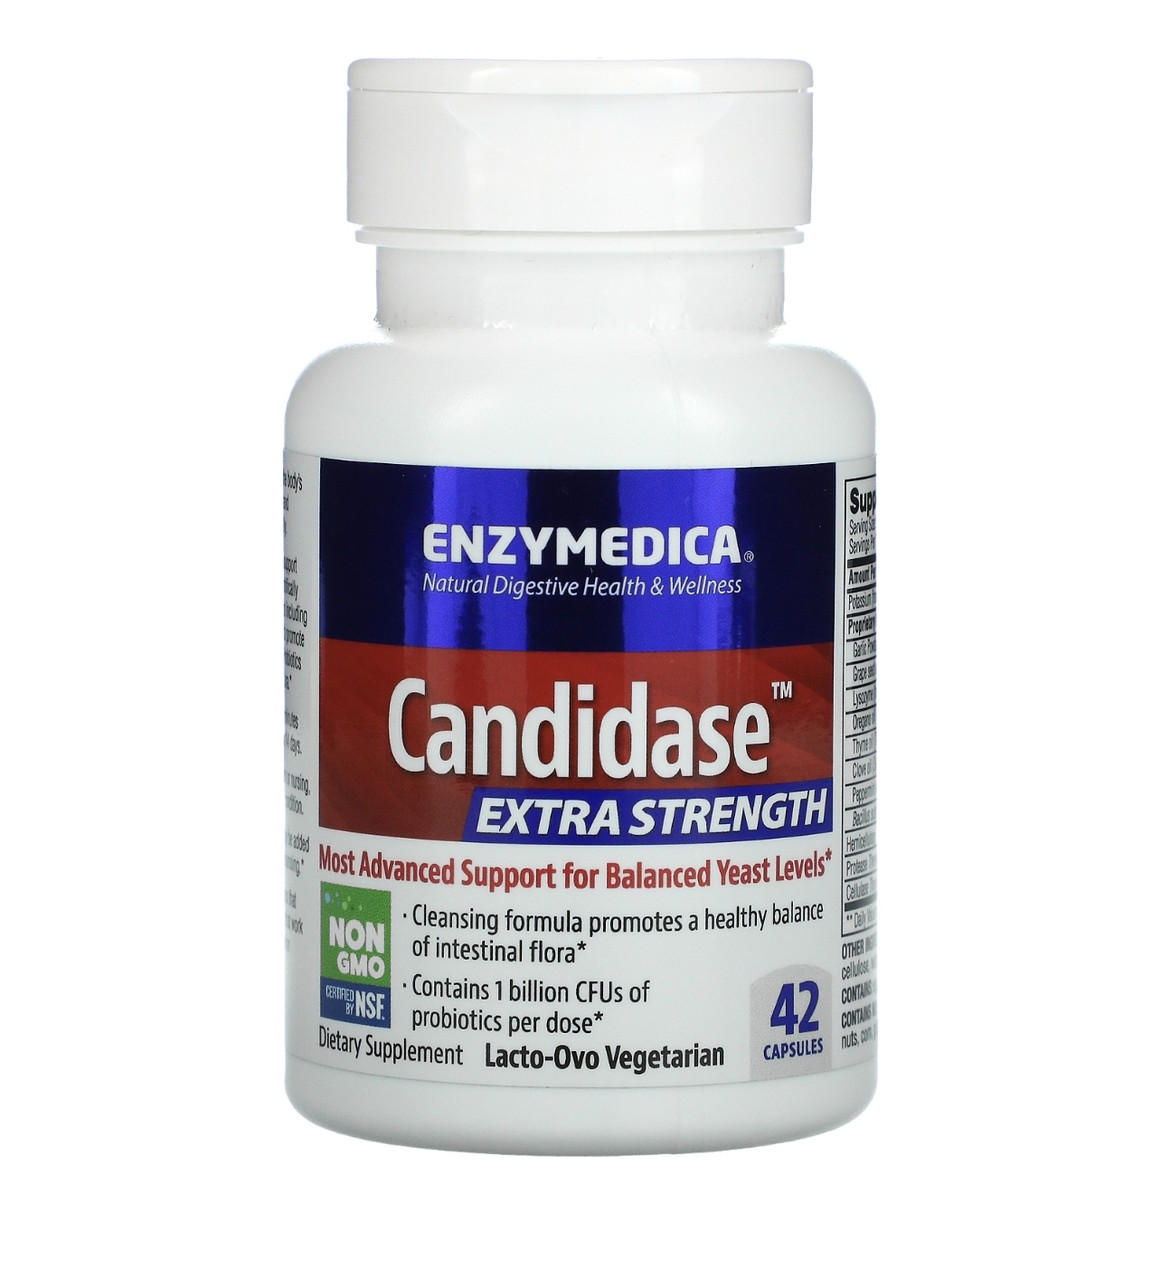 Enzymedica candidase, extra strength 42 капсулы - фото 1 - id-p107351347